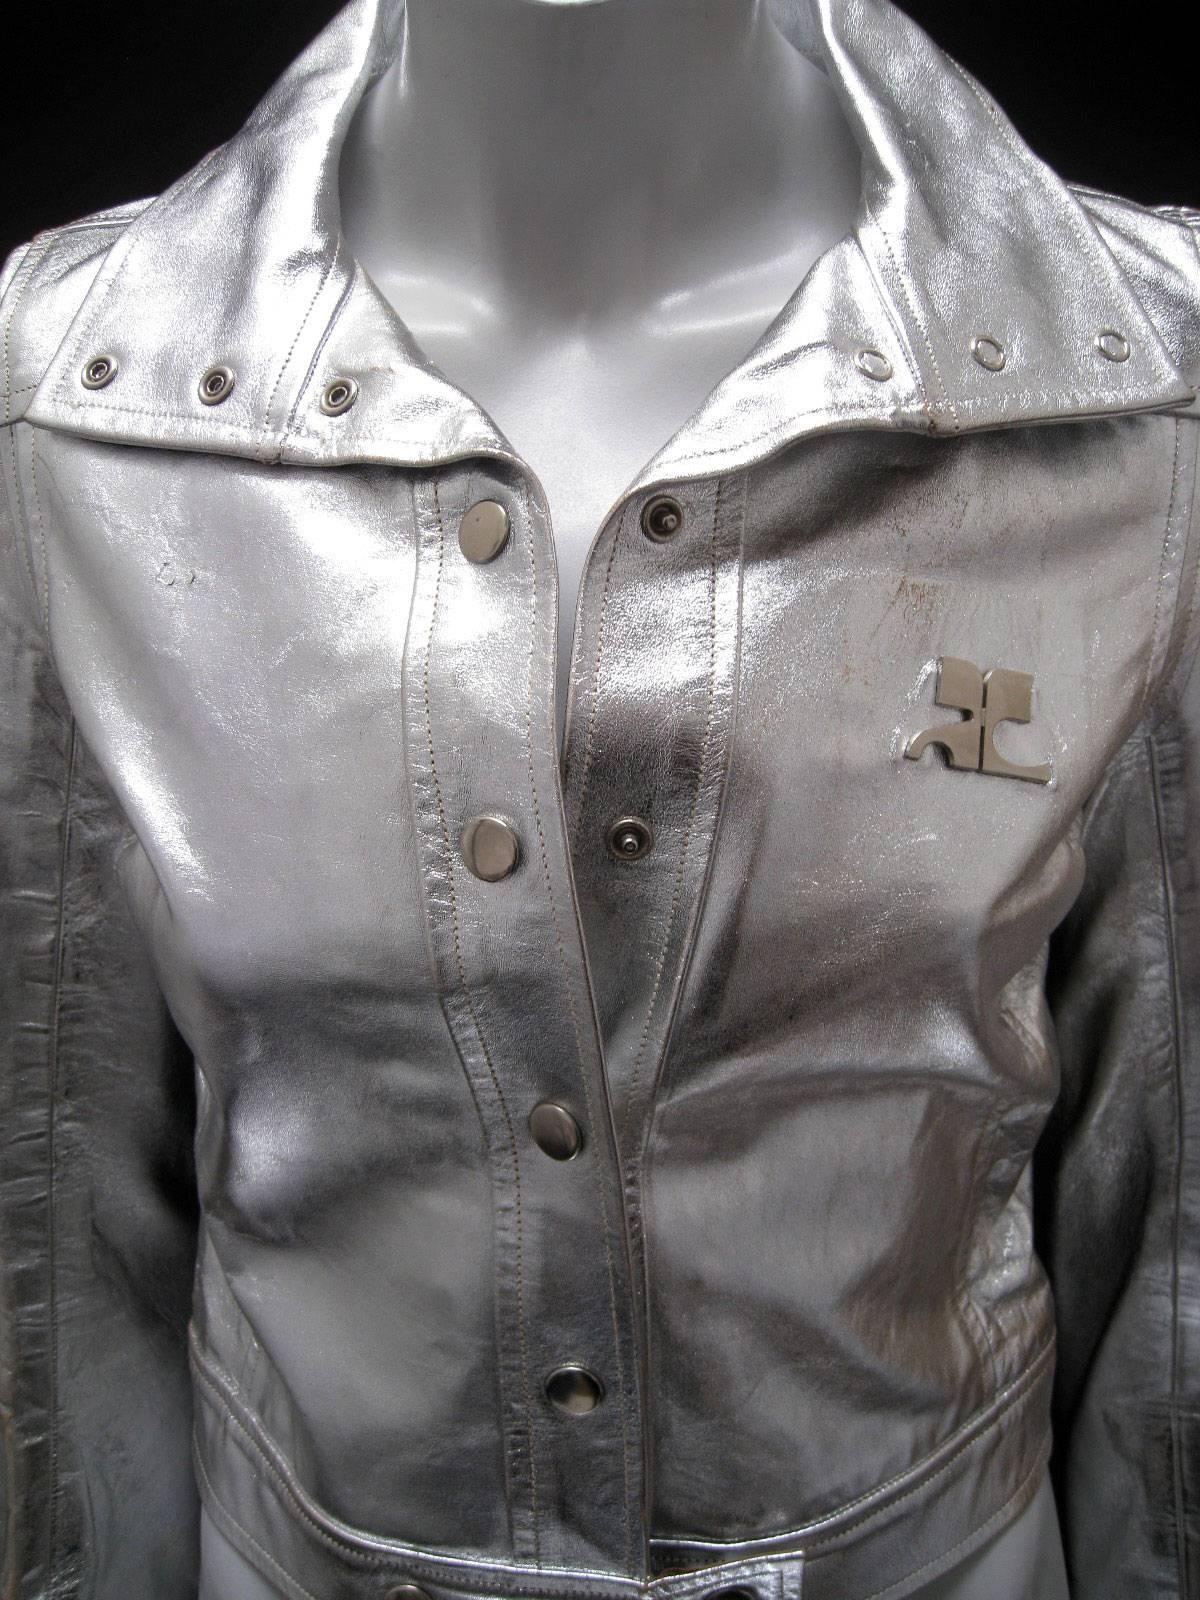 Rare space-age Andre Courreges statement silver leather jacket.

